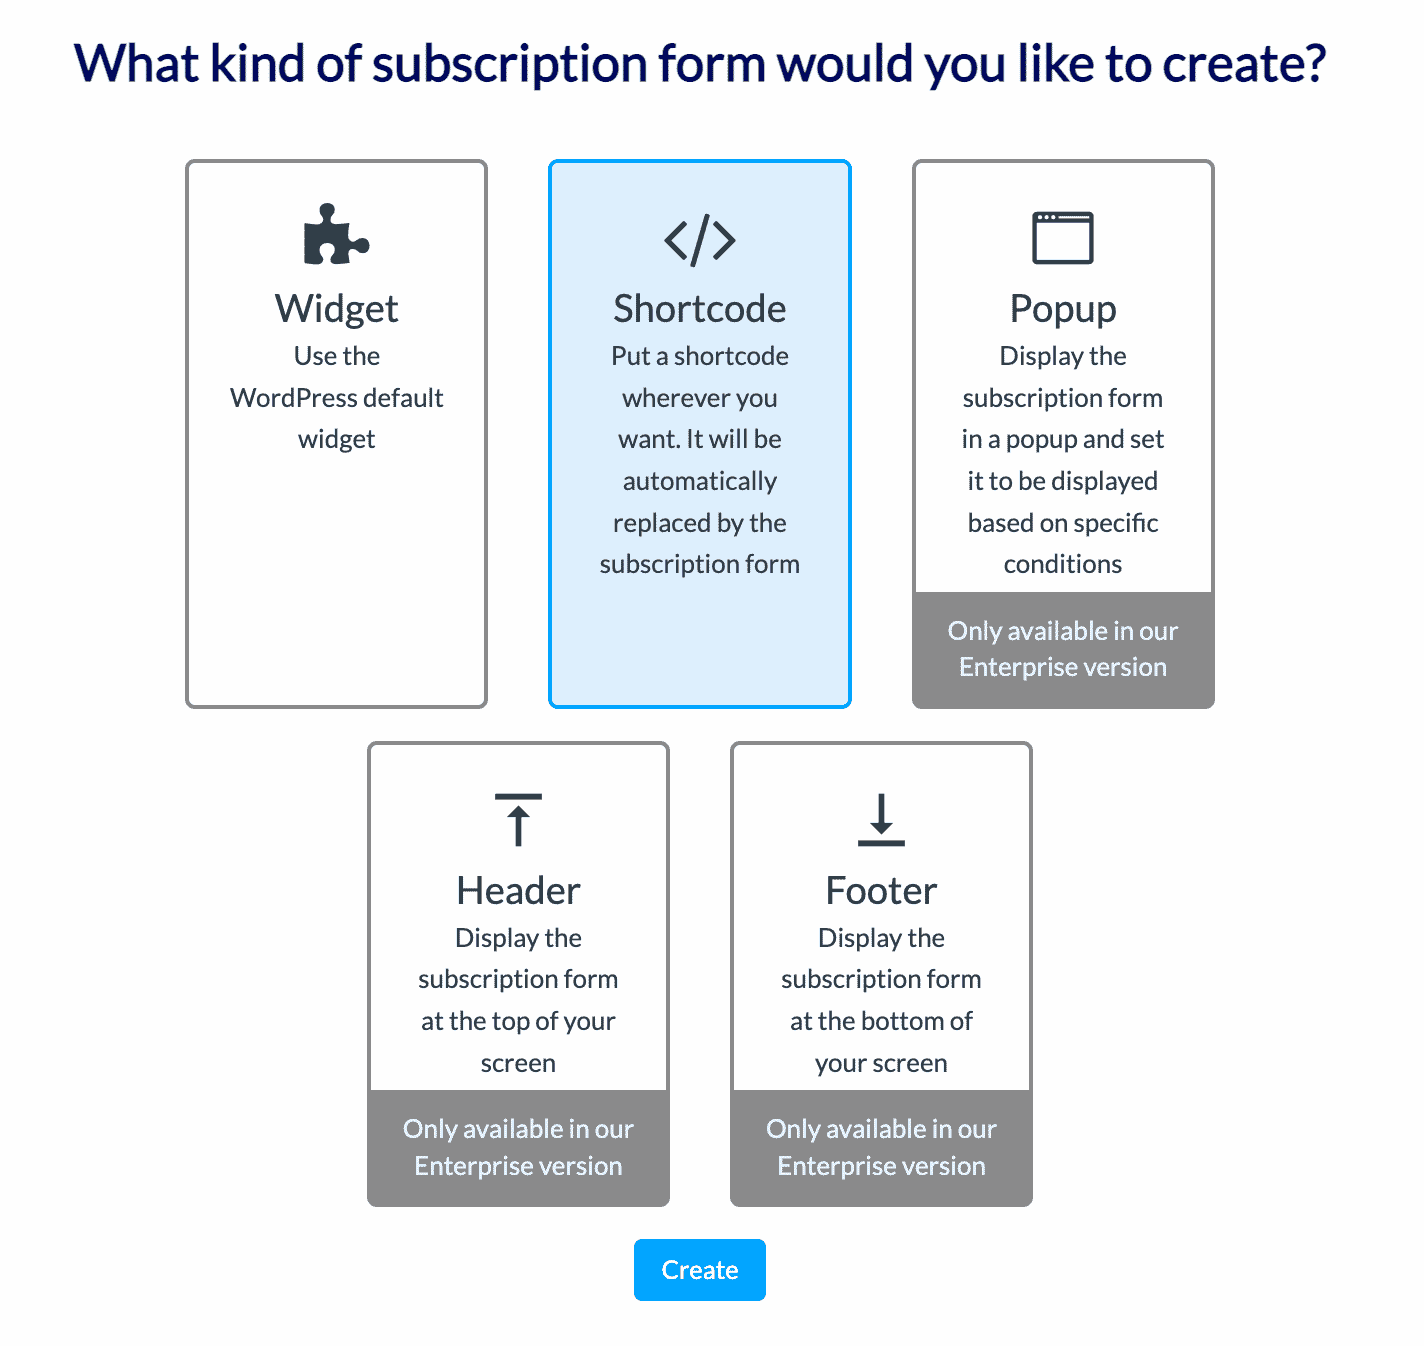 AcyMailing allows you to create a subscription form with a shortcode that you can integrate anywhere.